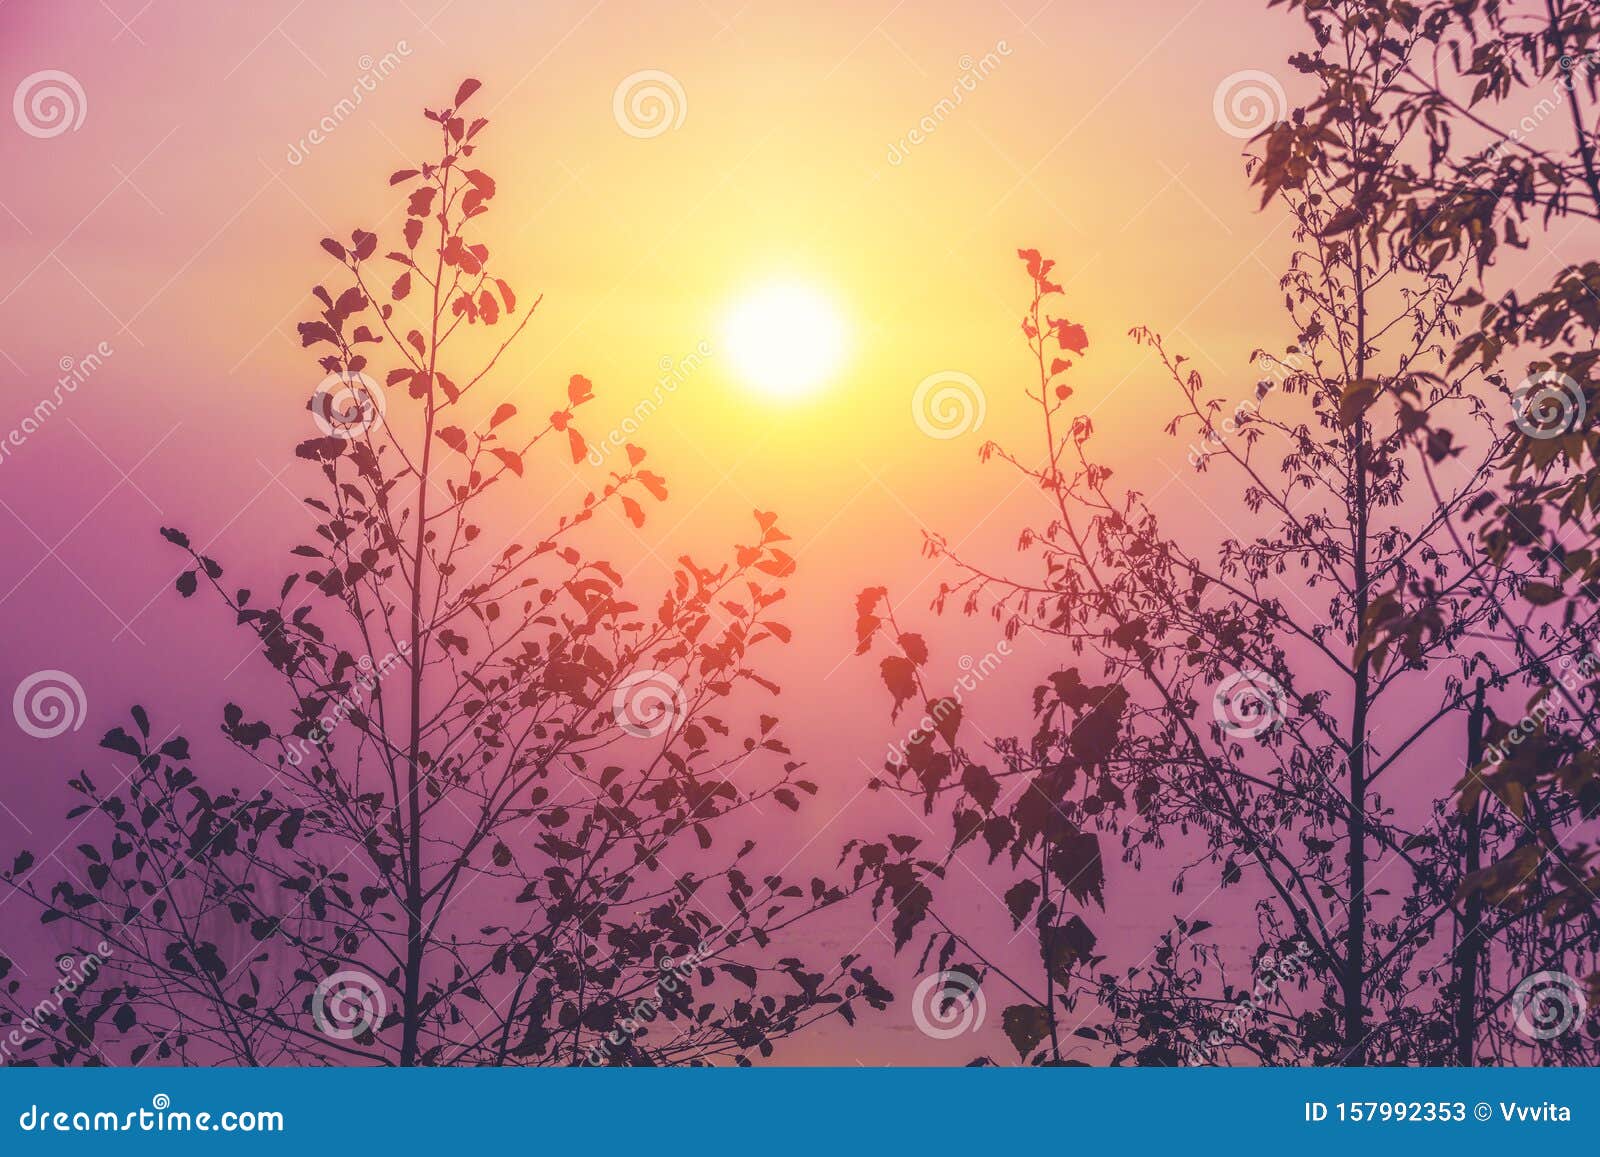 Branches of Trees Against Gradient Sunrise Sky Stock Image - Image of